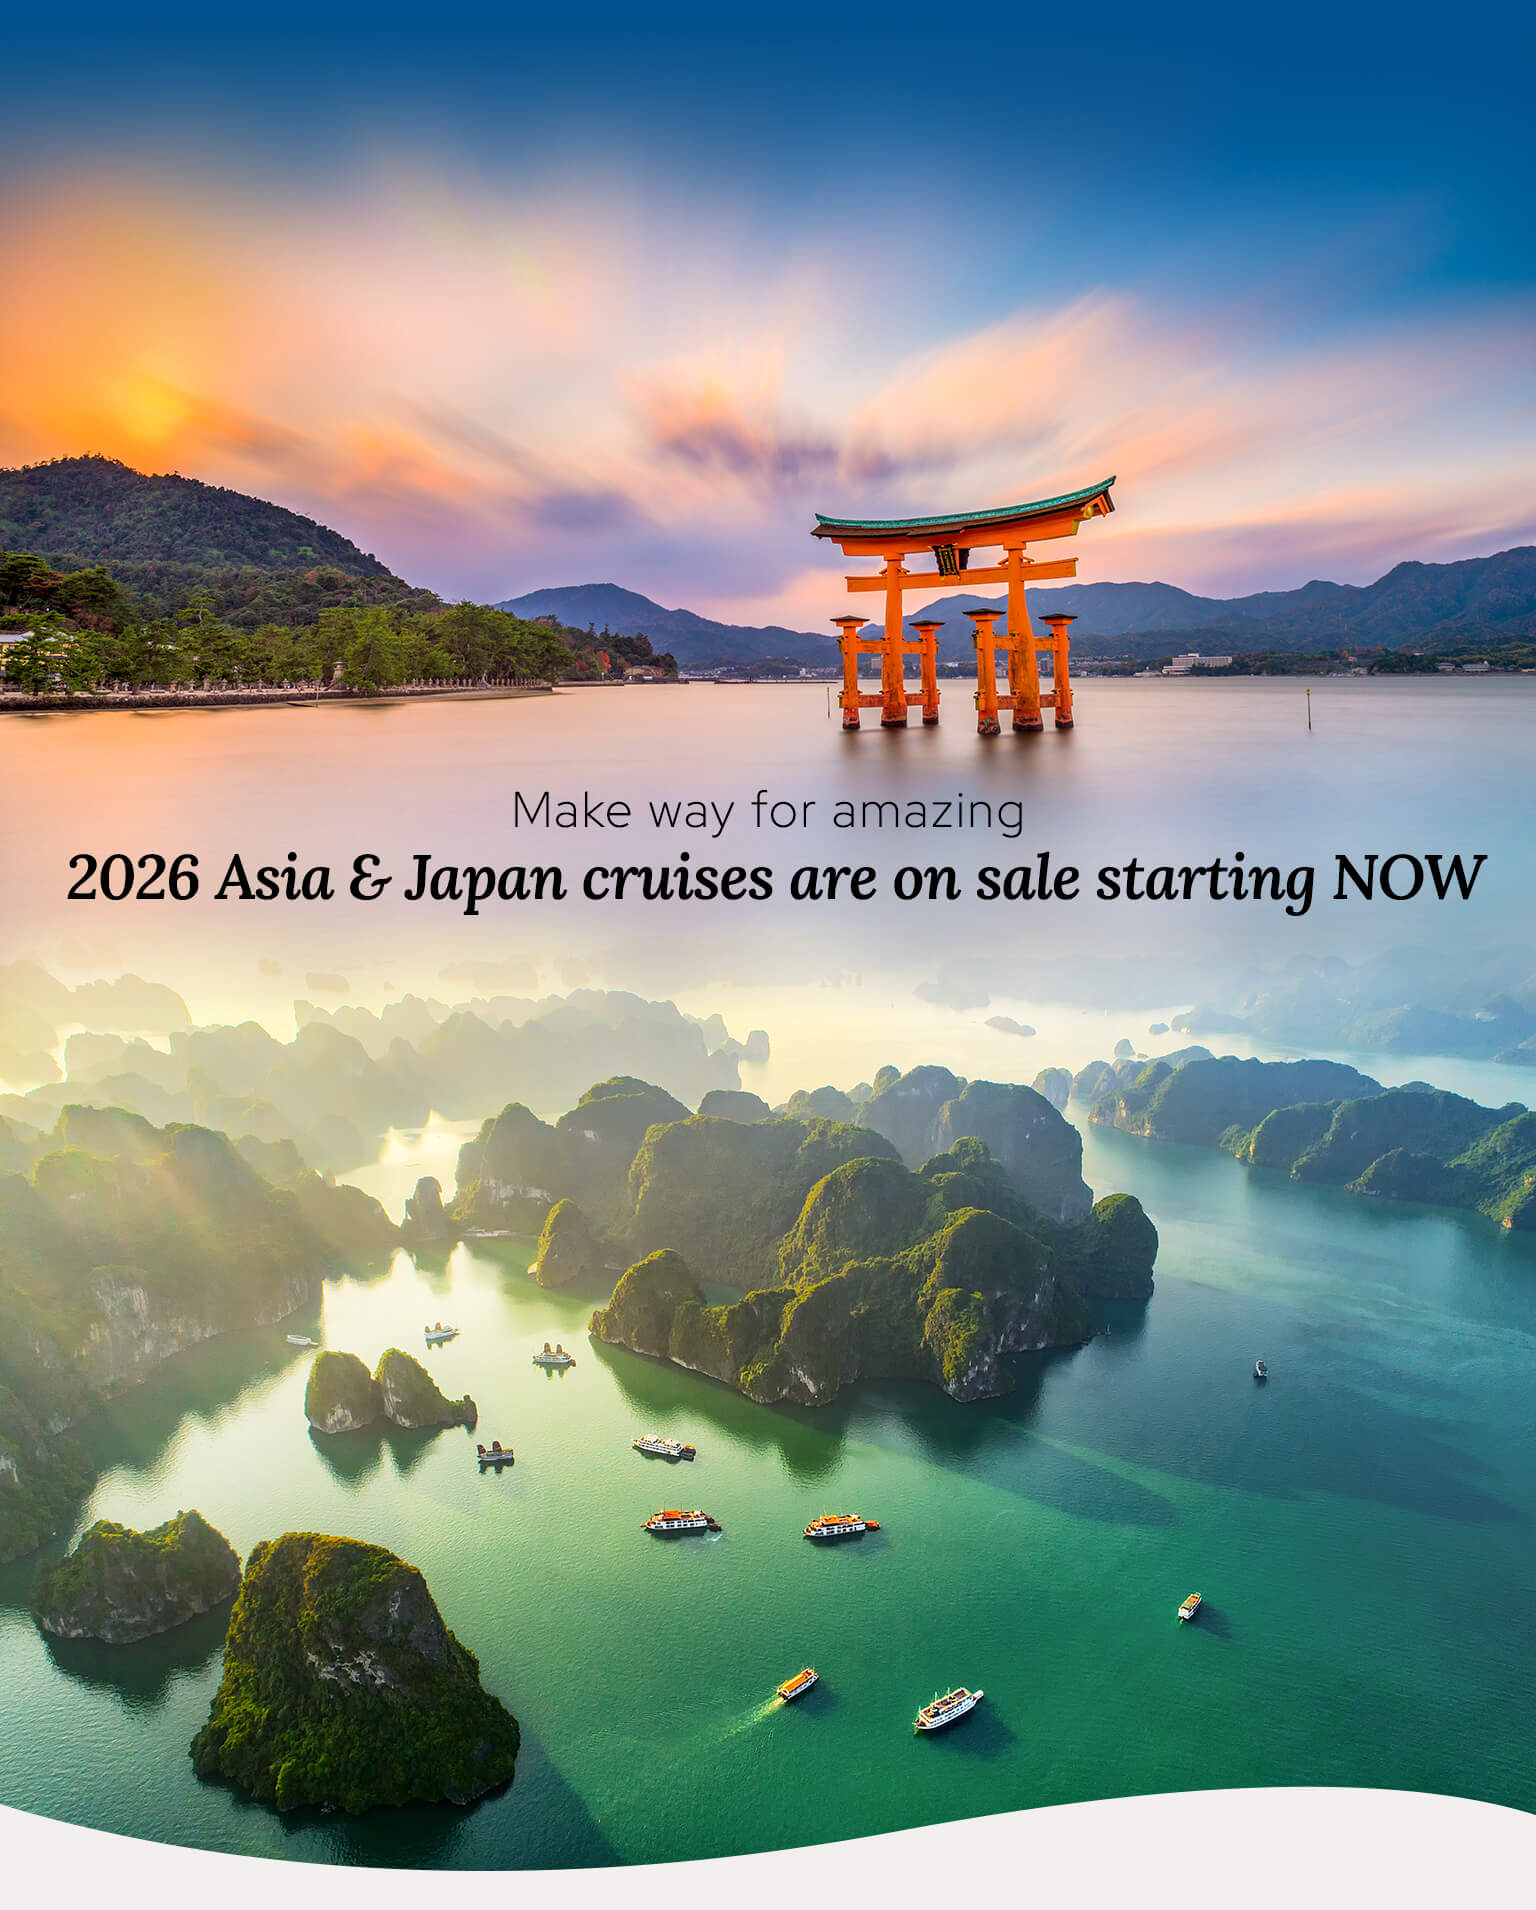 Make way for amazing 2026 Asia & Japan cruises are on sale starting NOW.